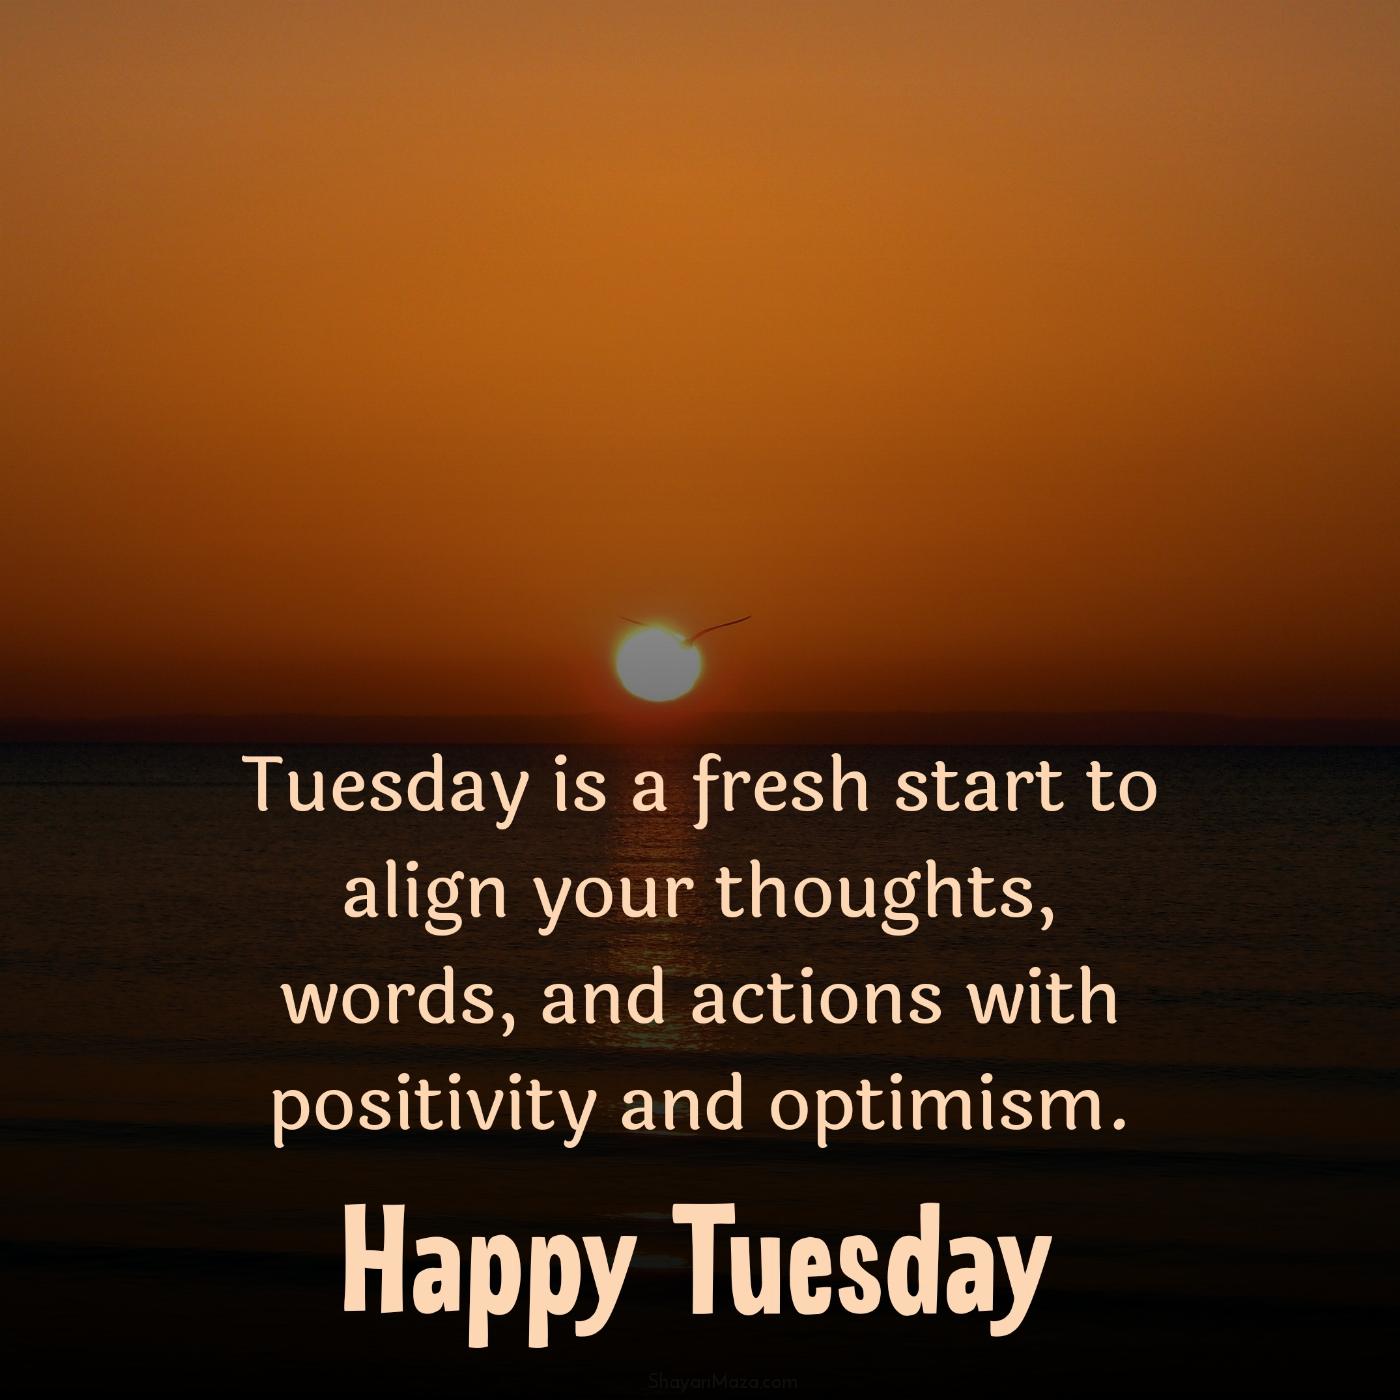 Tuesday is a fresh start to align your thoughts words